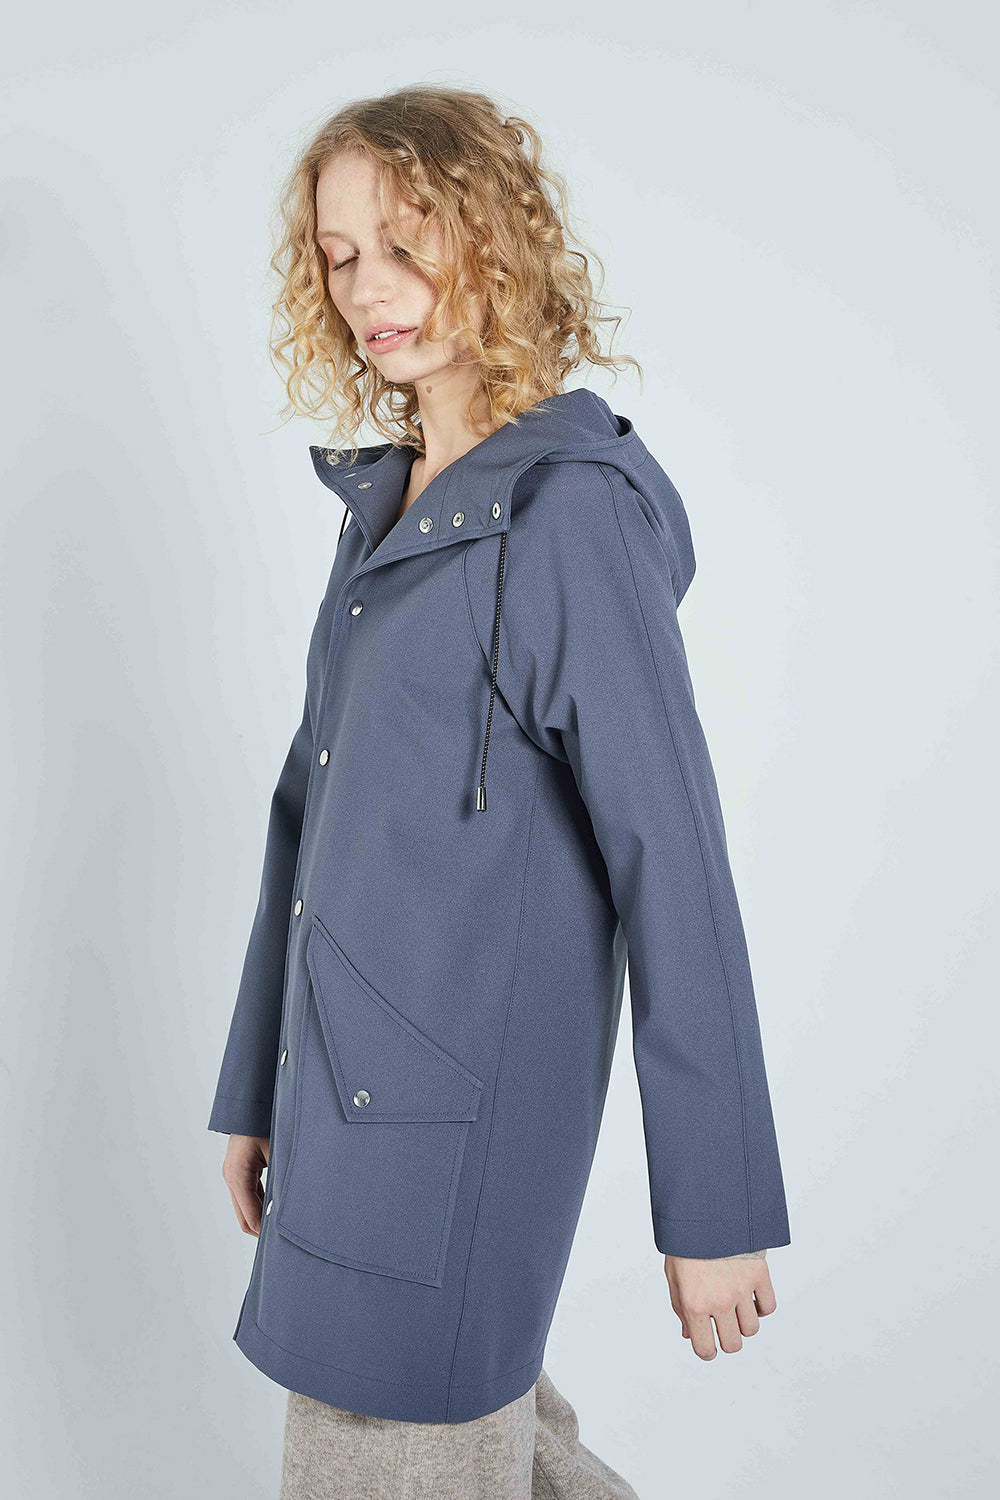 Grey Unisex City Raincoat - recycled material